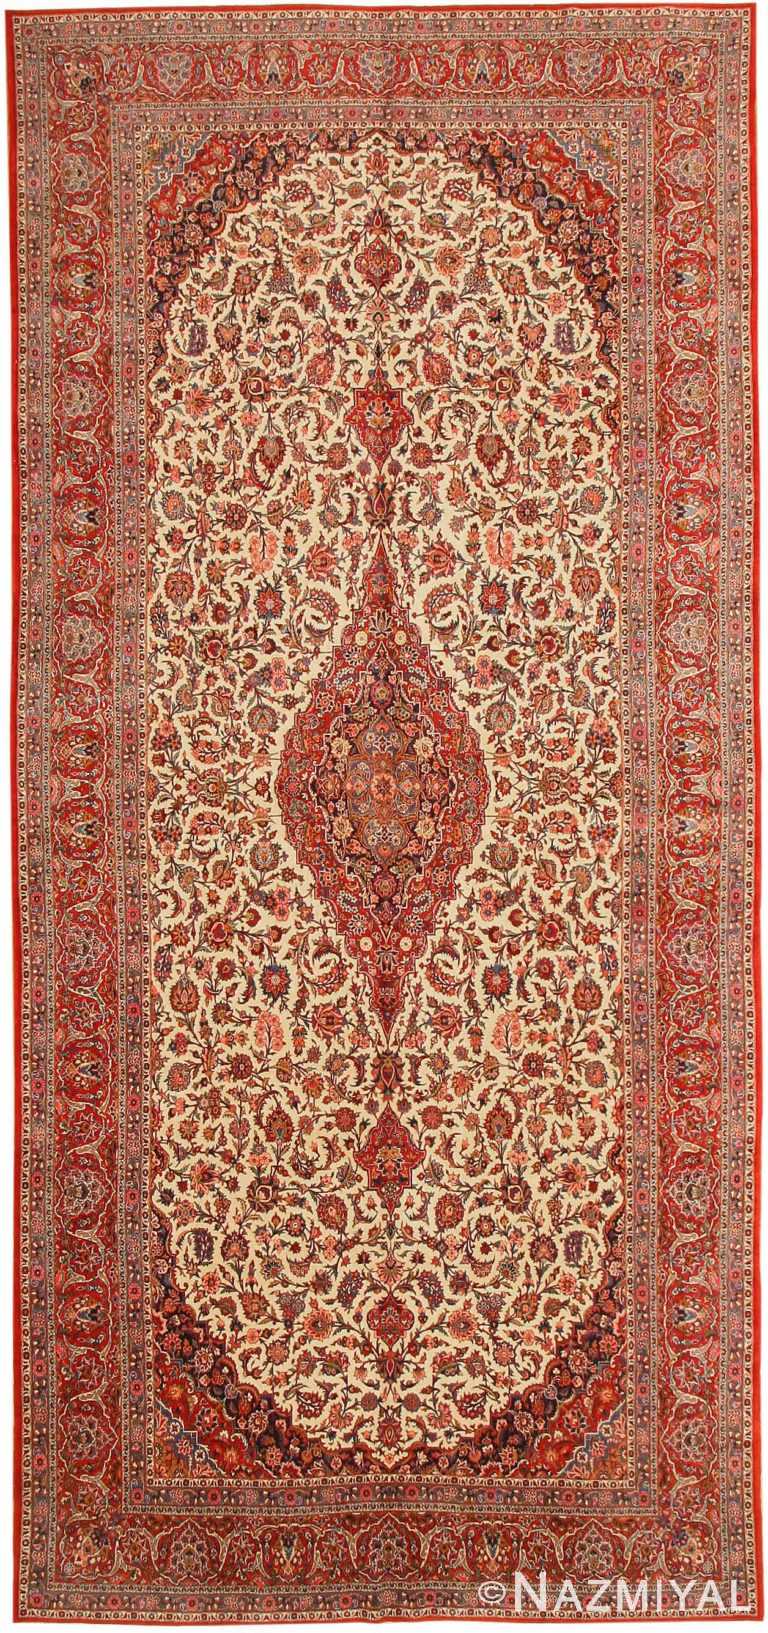 Large Gallery Size Antique Kashan Persian Rug #43580 by Nazmiyal Antique Rugs